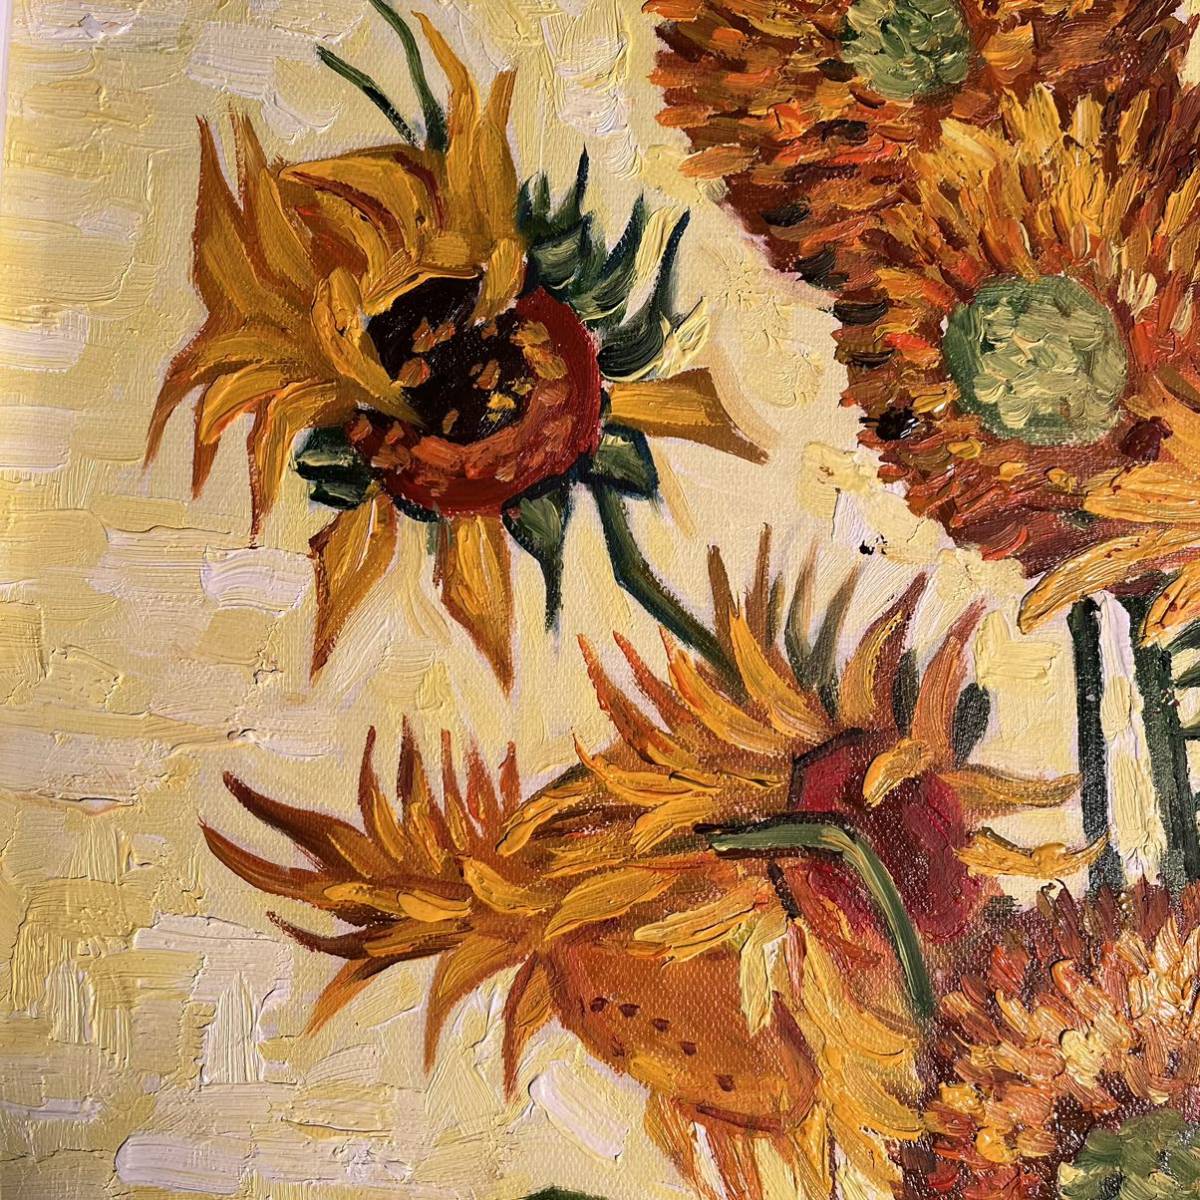 * preeminence work * handwriting . oil painting go ho sunflower amount attaching picture interior 